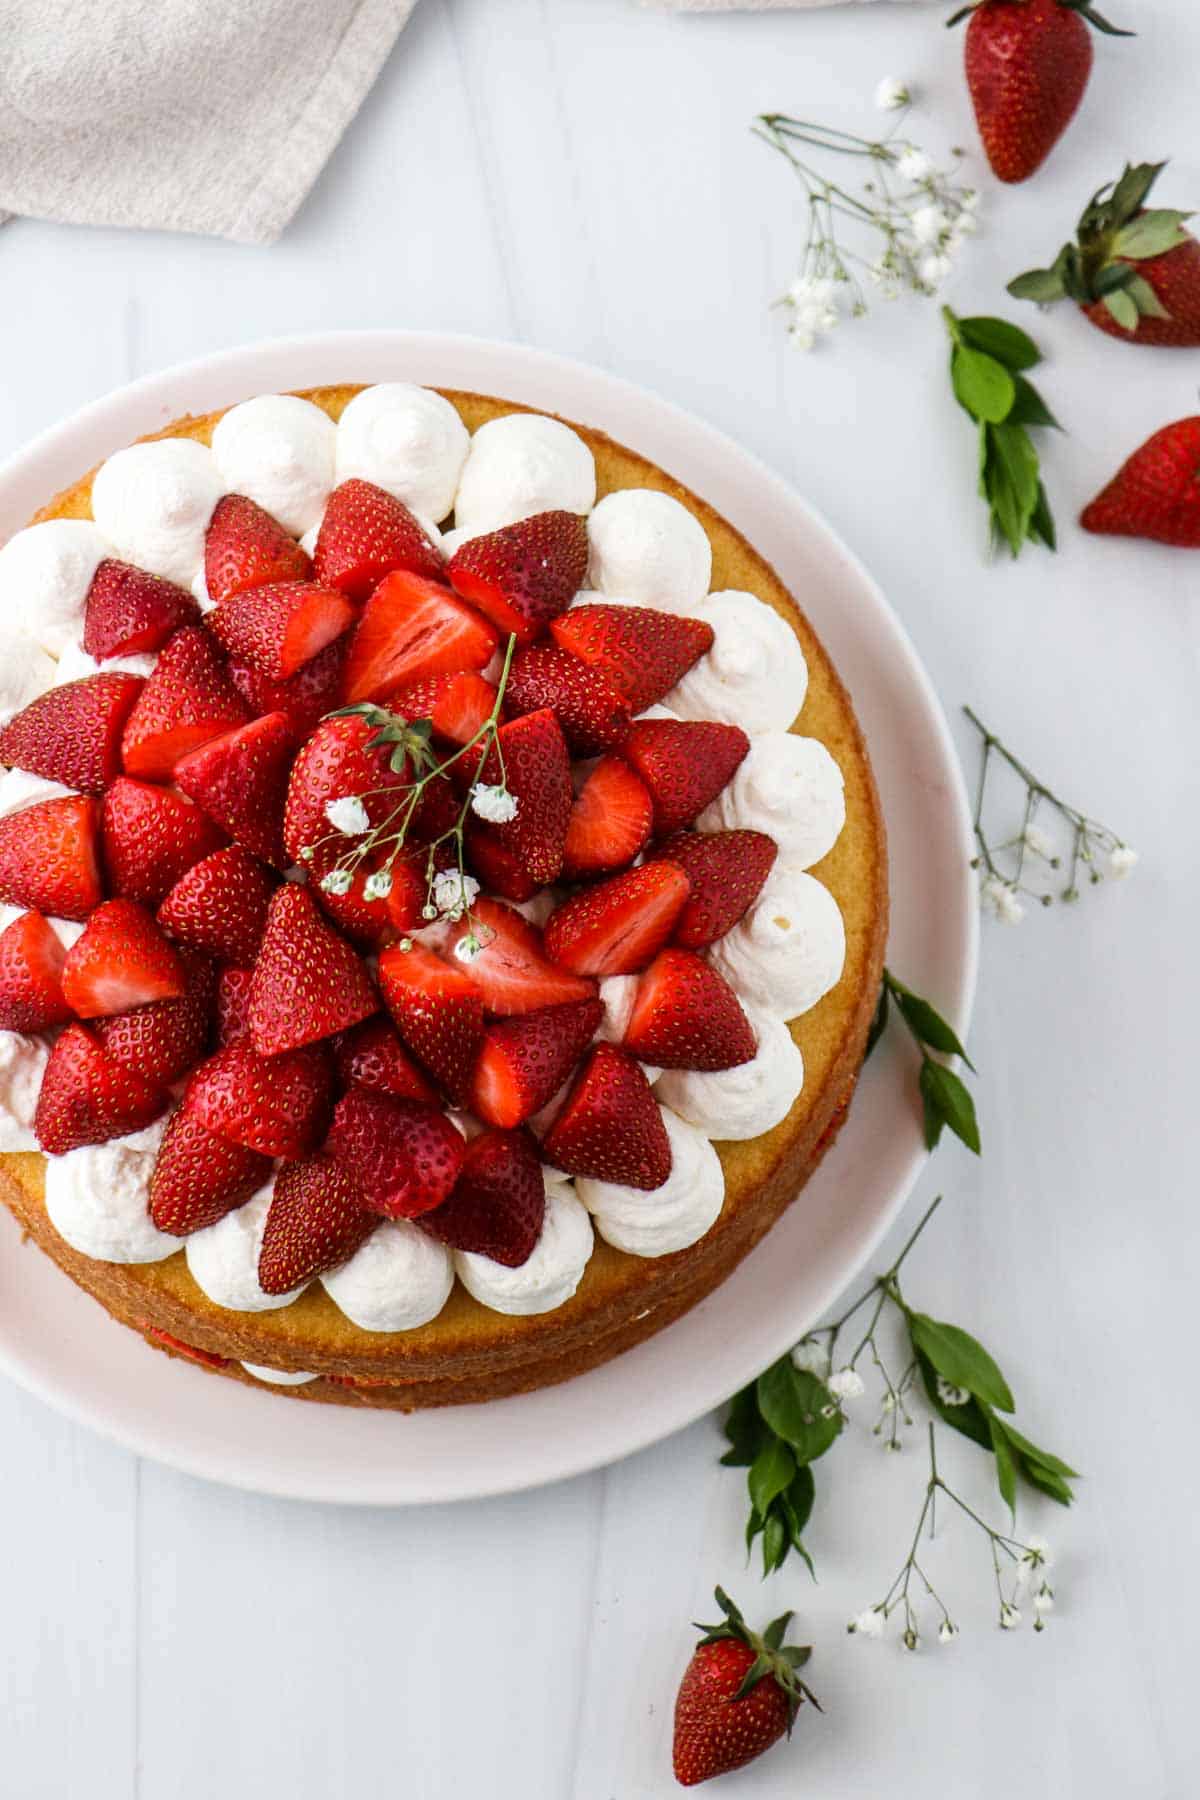 Overhead view of a cake topped with strawberries.